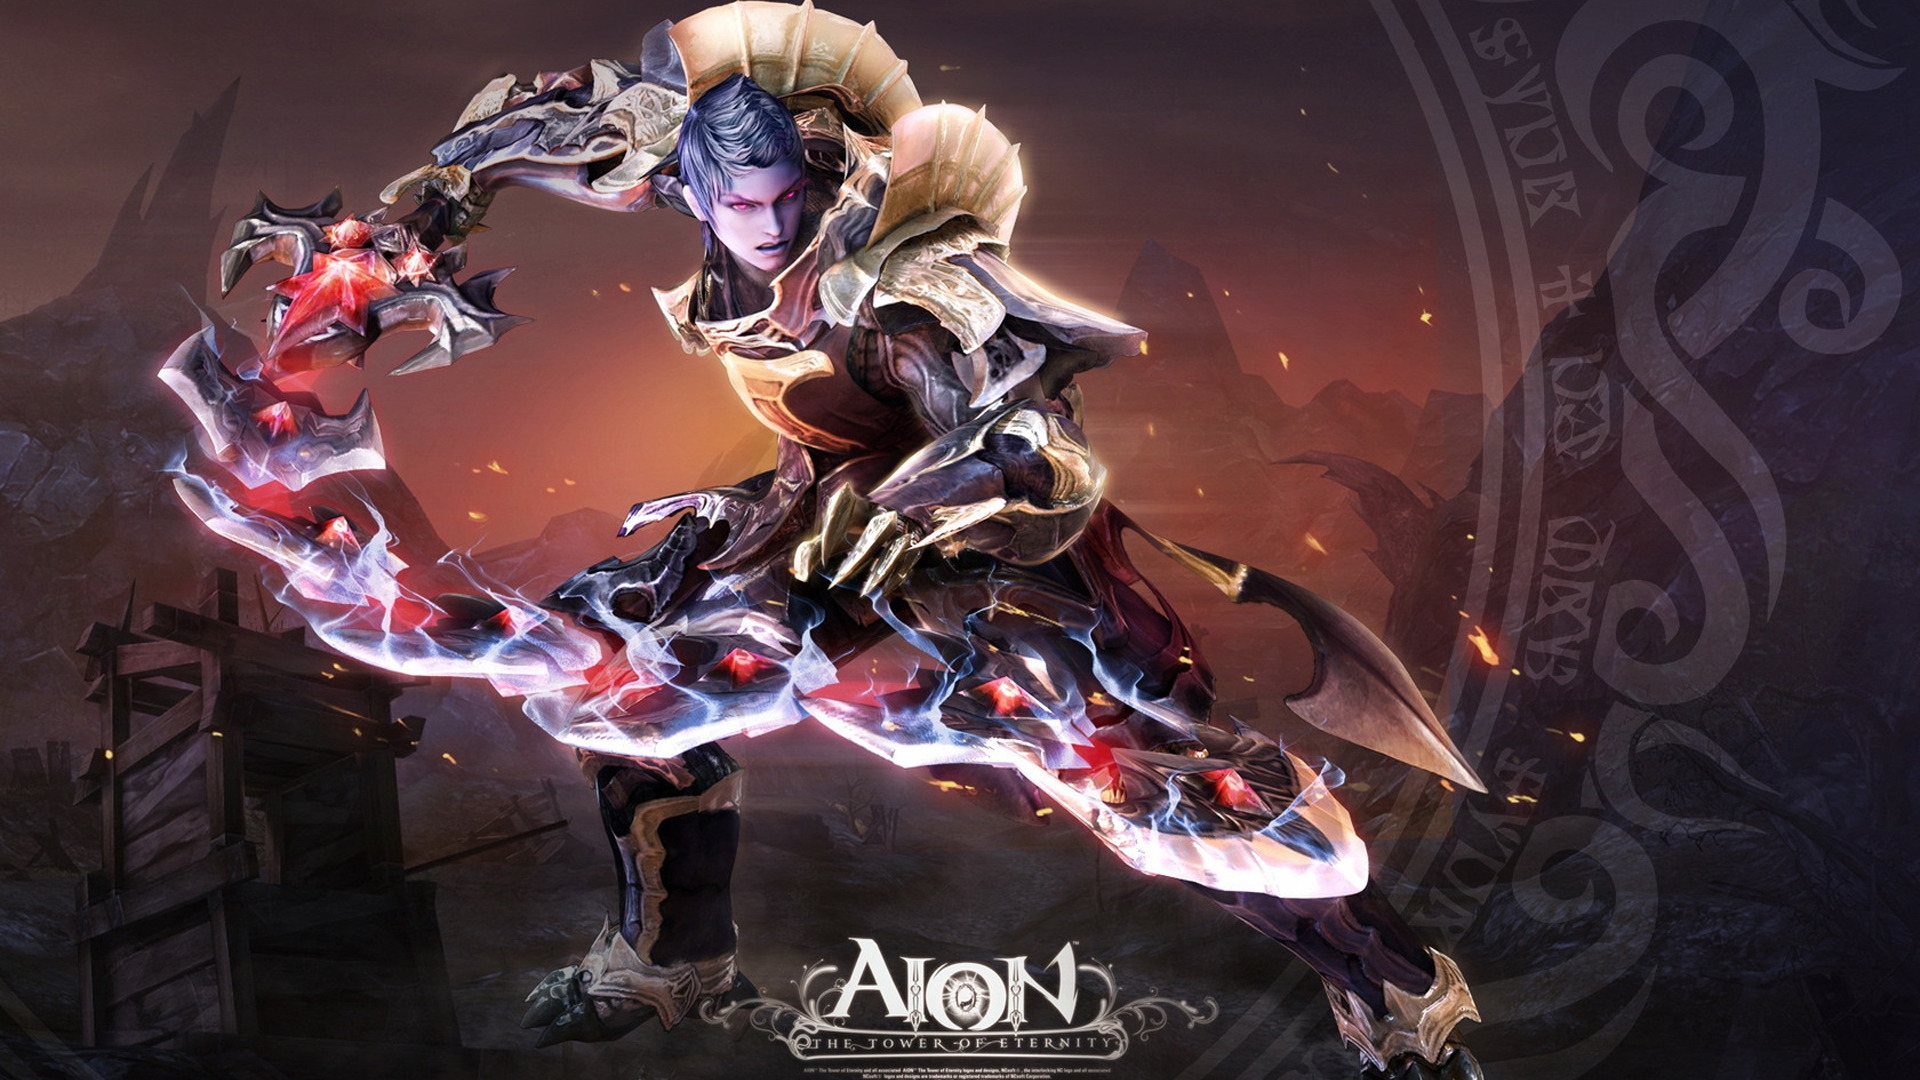 Aion Character for 1920 x 1080 HDTV 1080p resolution